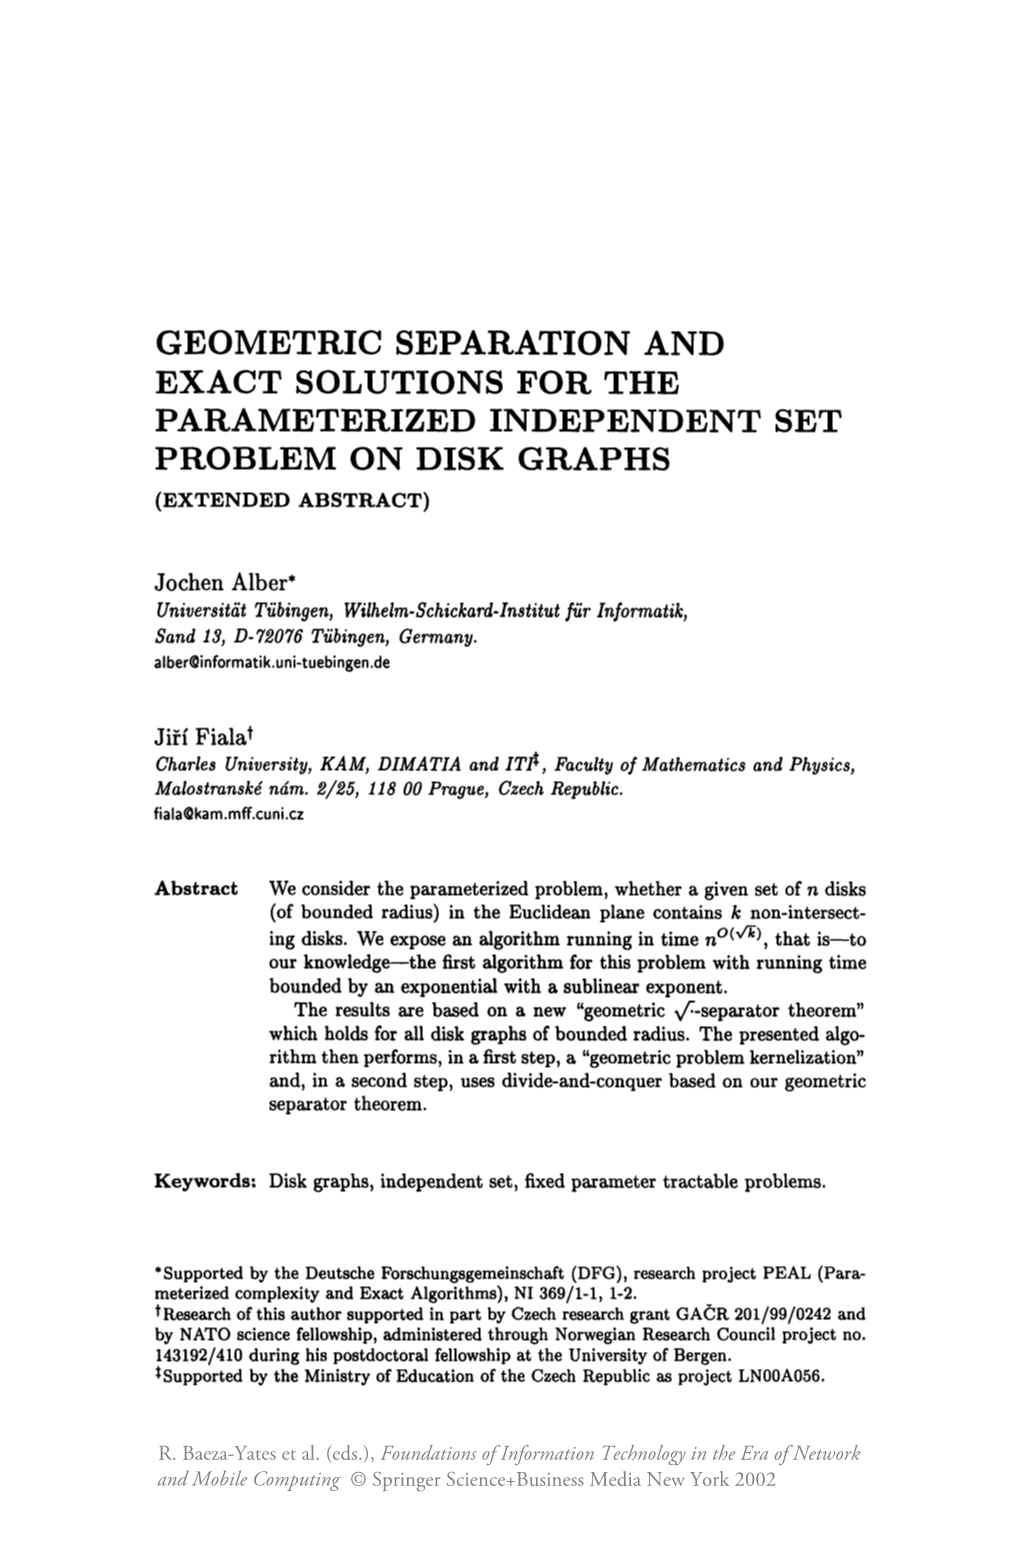 Geometric Separation and Exact Solutions for the Parameterized Independent Set Problem on Disk Graphs {Extended Abstract)